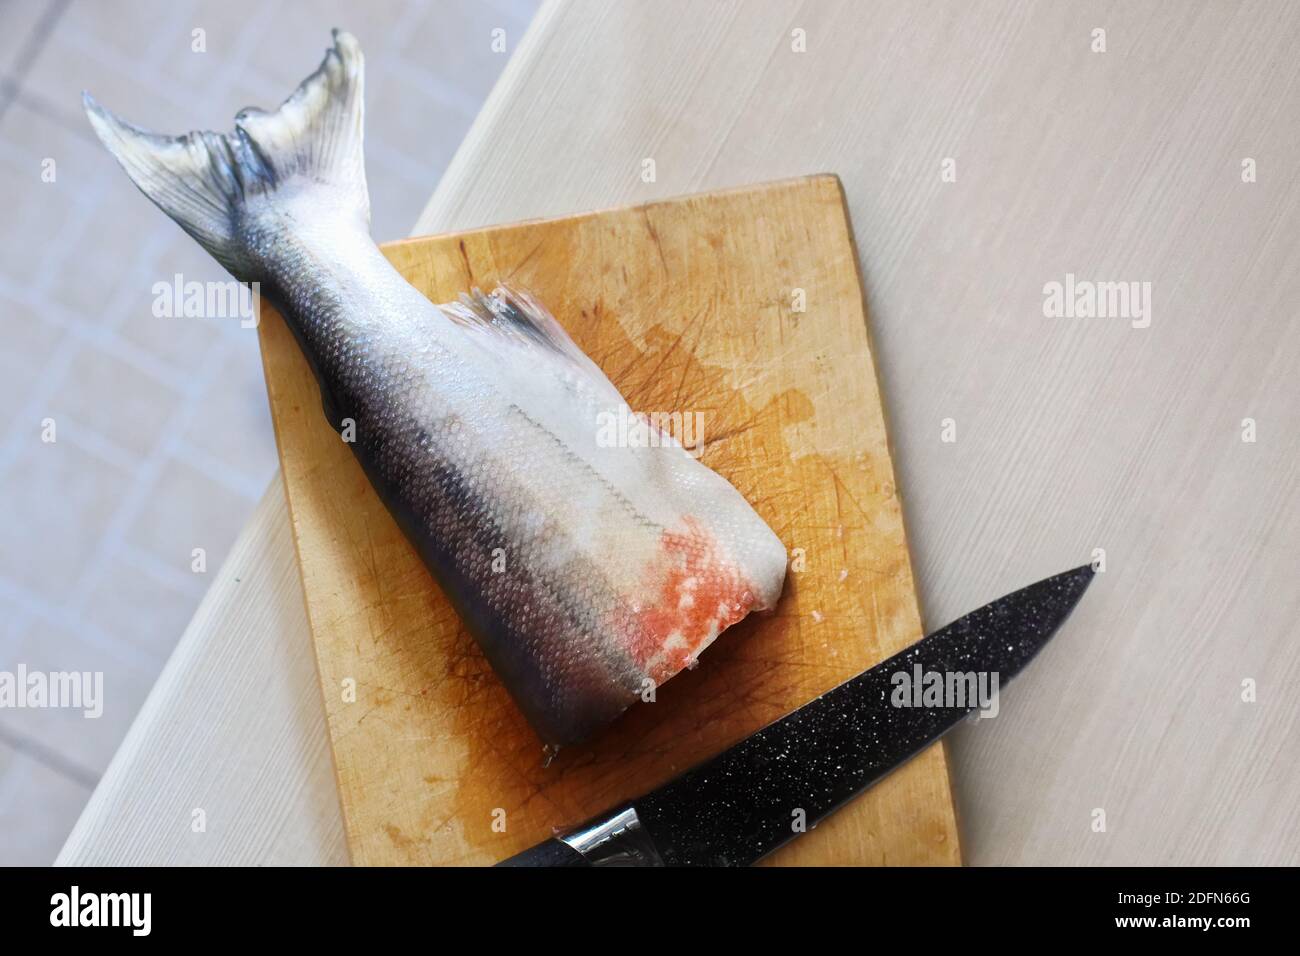 On the cutting Board is a piece of fish and a knife. The cooking process of the fish.  Stock Photo